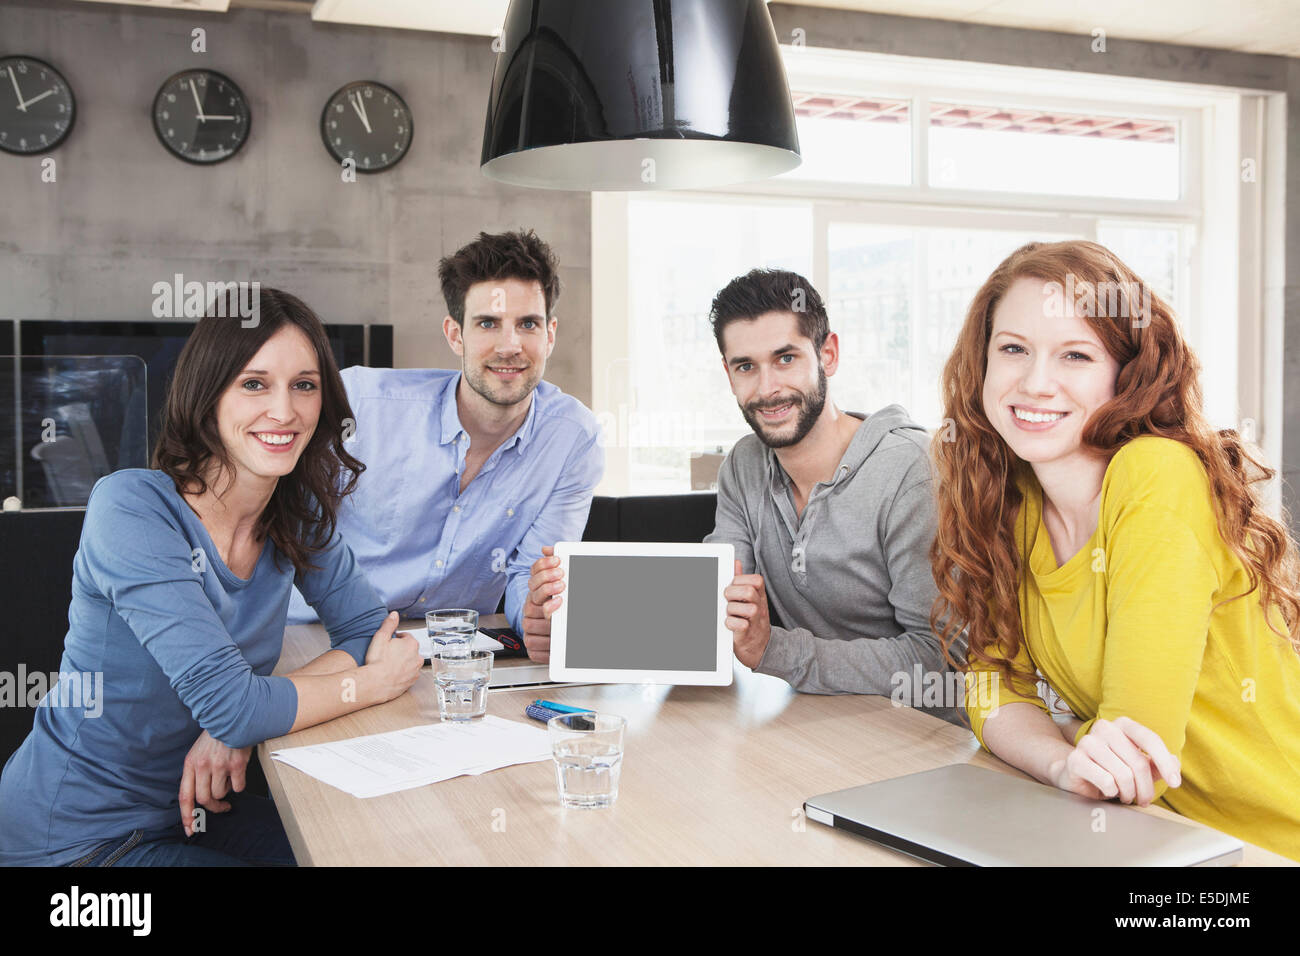 Group picture of four creative people showing tablet computer in the office Stock Photo